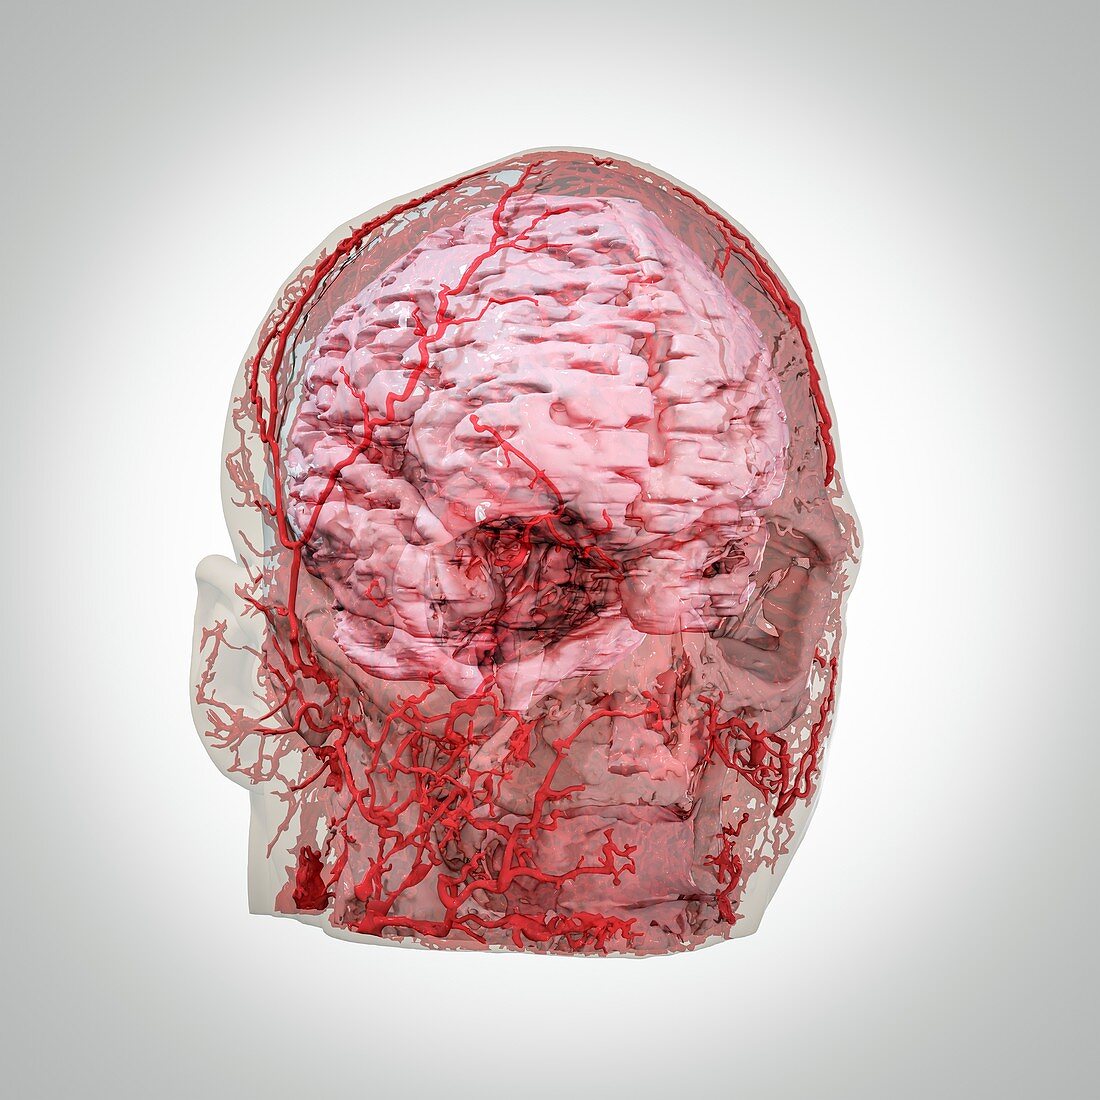 Human head and brain blood vessels, 3D CT scan